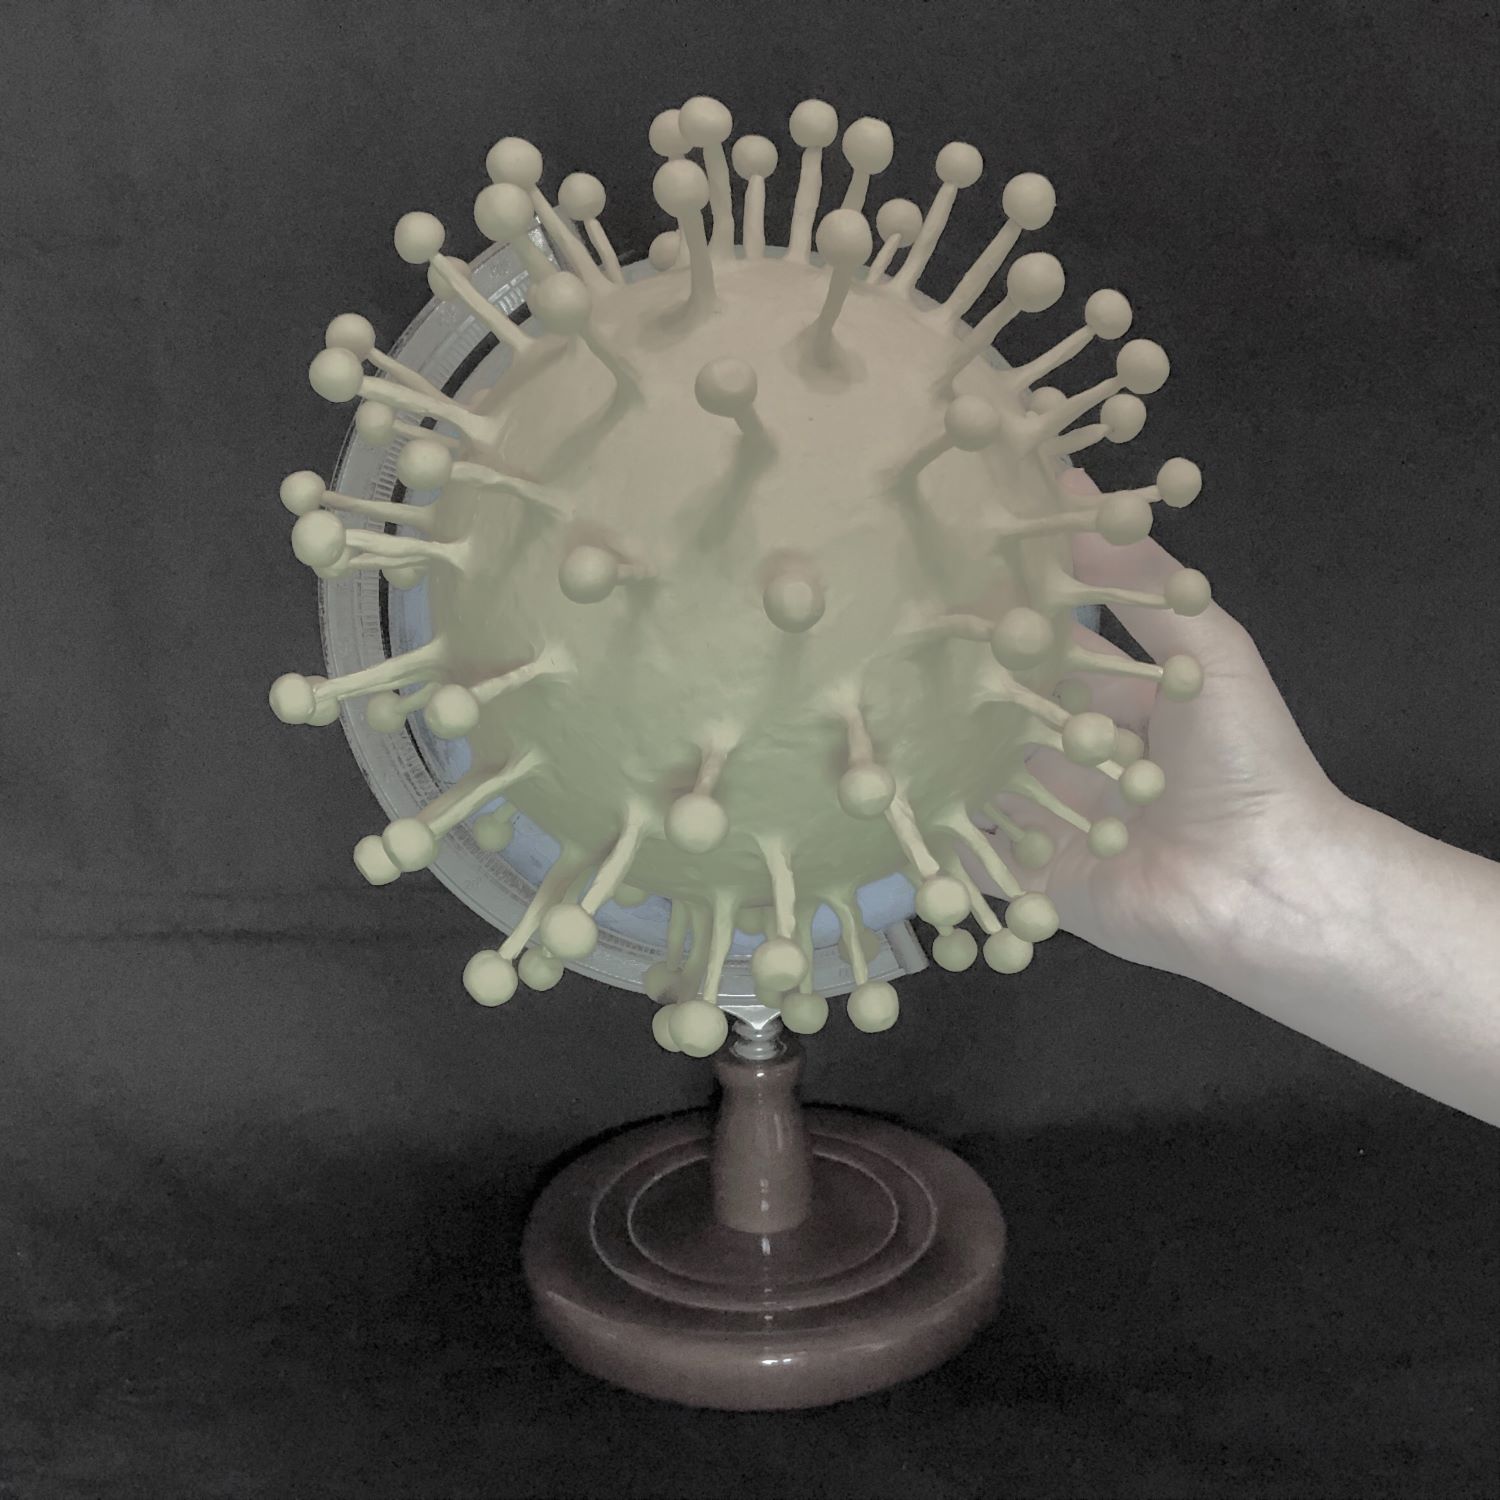 Digital image of virus cell on a stand made for a globe with hand